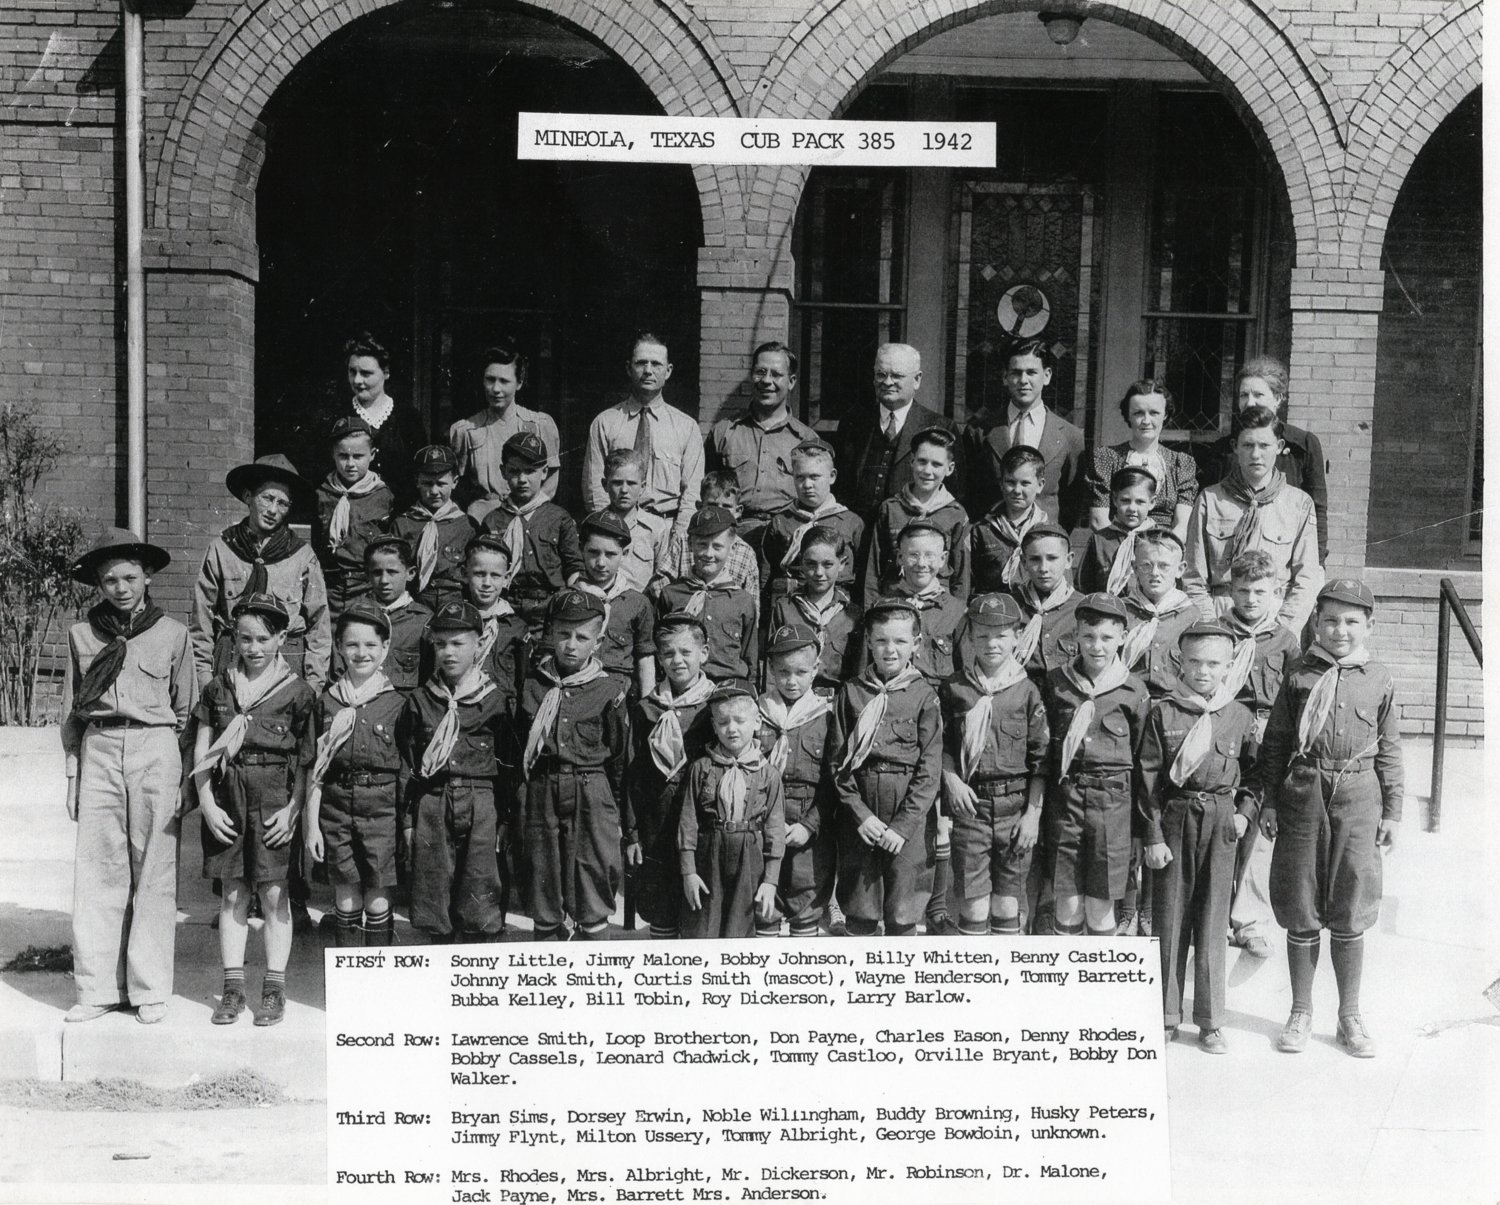 Scouting was alive and well in Mineola in 1942, with some well-known names among those pictured. The local pack and troop may be dissolved by this time next year.